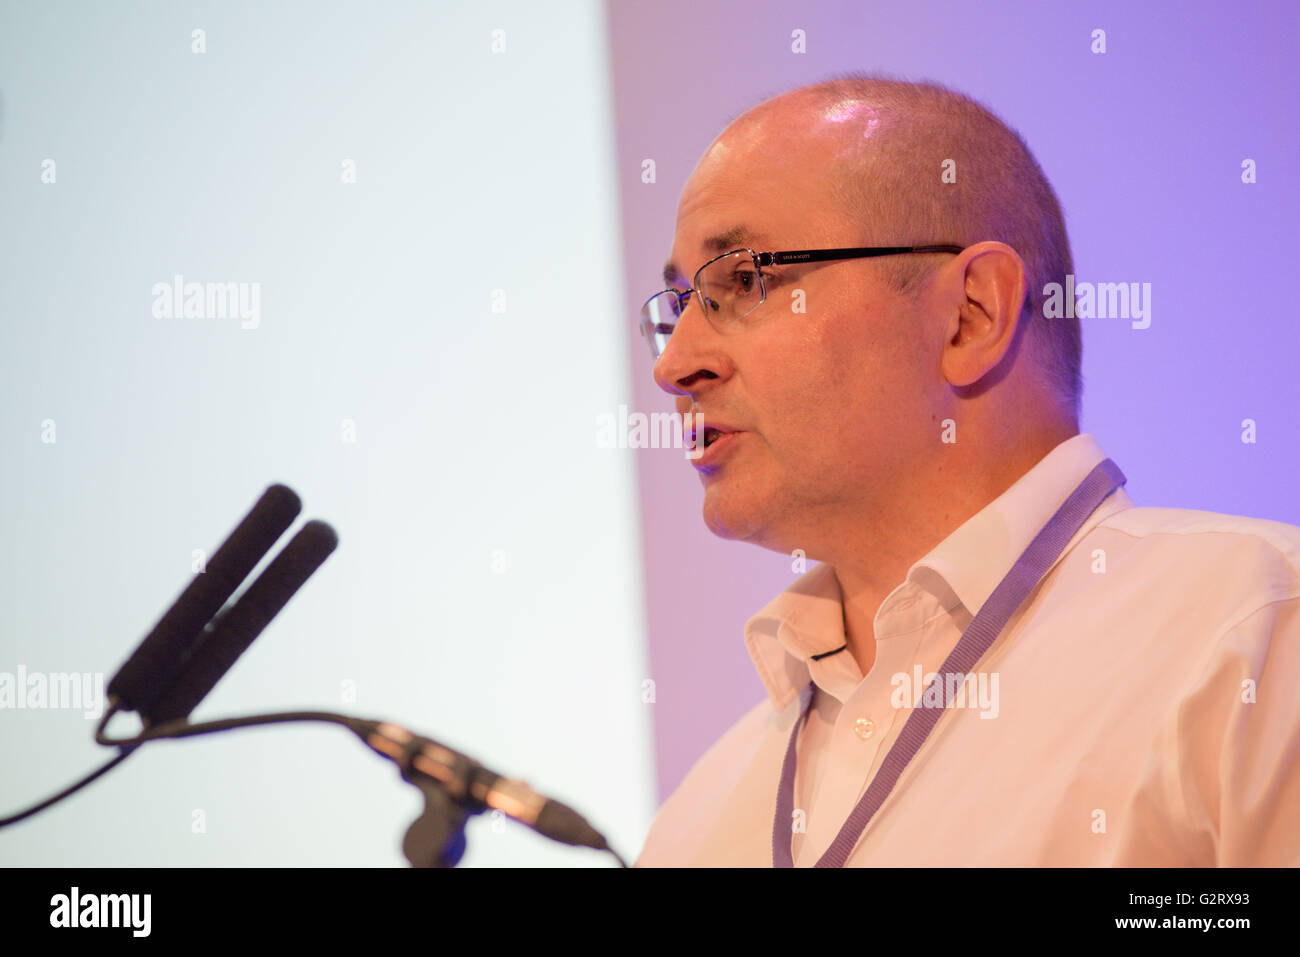 Jamie Hogg, Business Community Partner, Royal Bank of Scotland speaking at conference Stock Photo